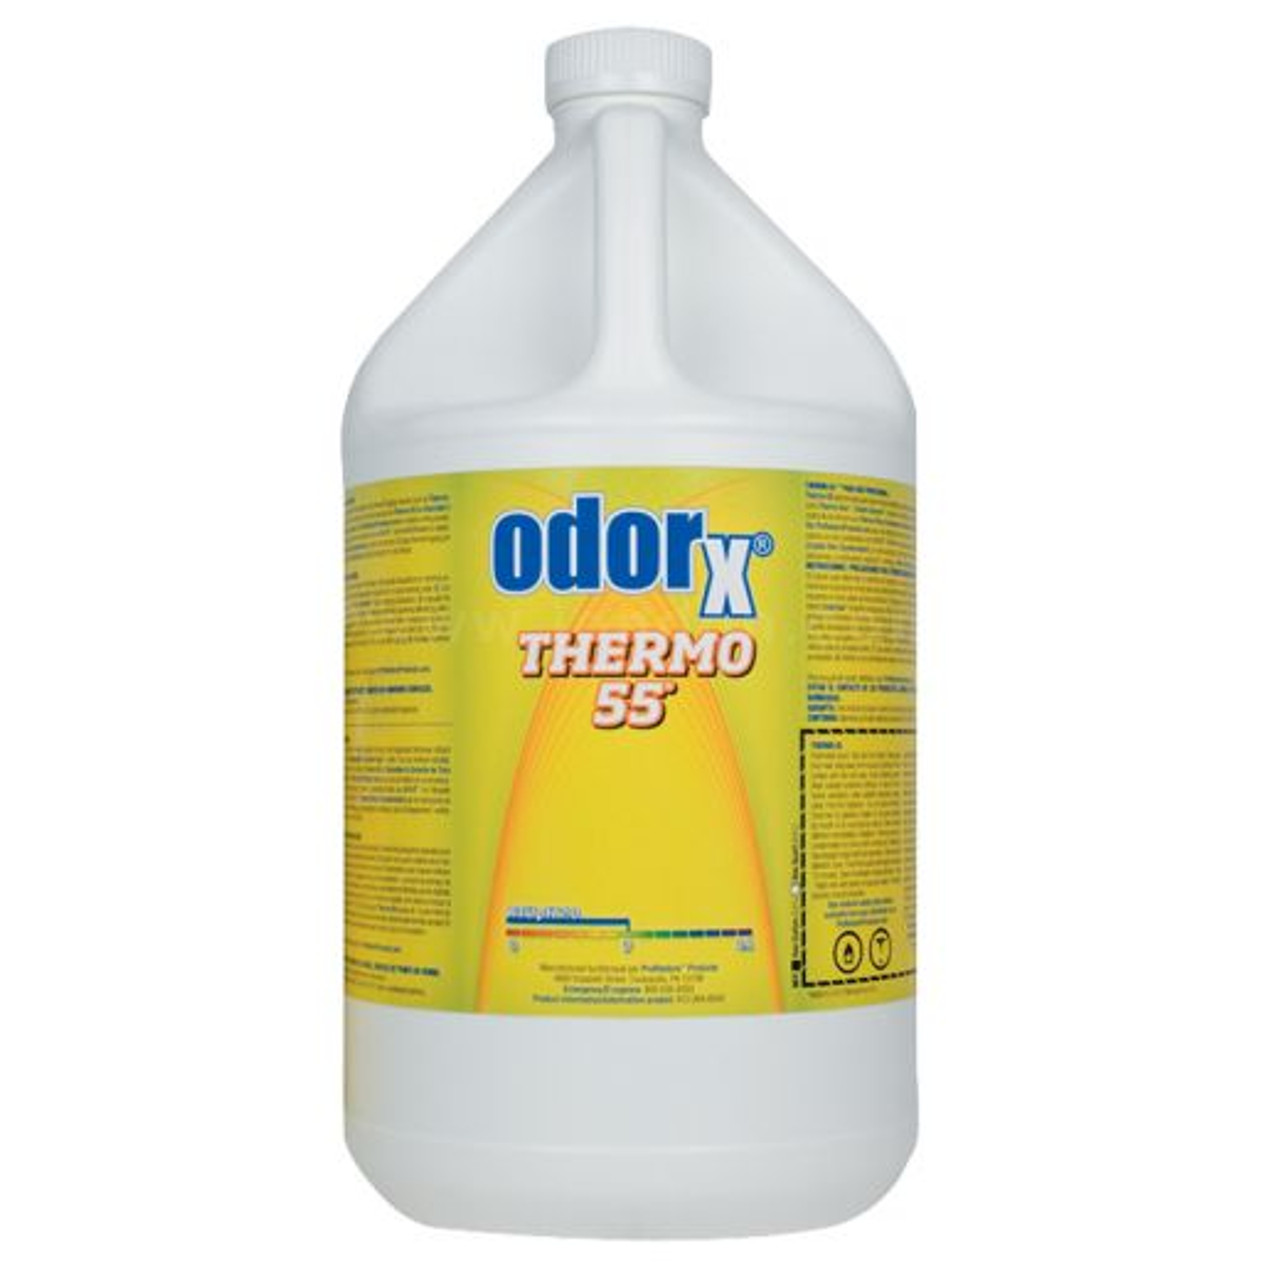 ODORx Thermo 55 Neutral Scent (Unscented) CASE of 4 Gal.